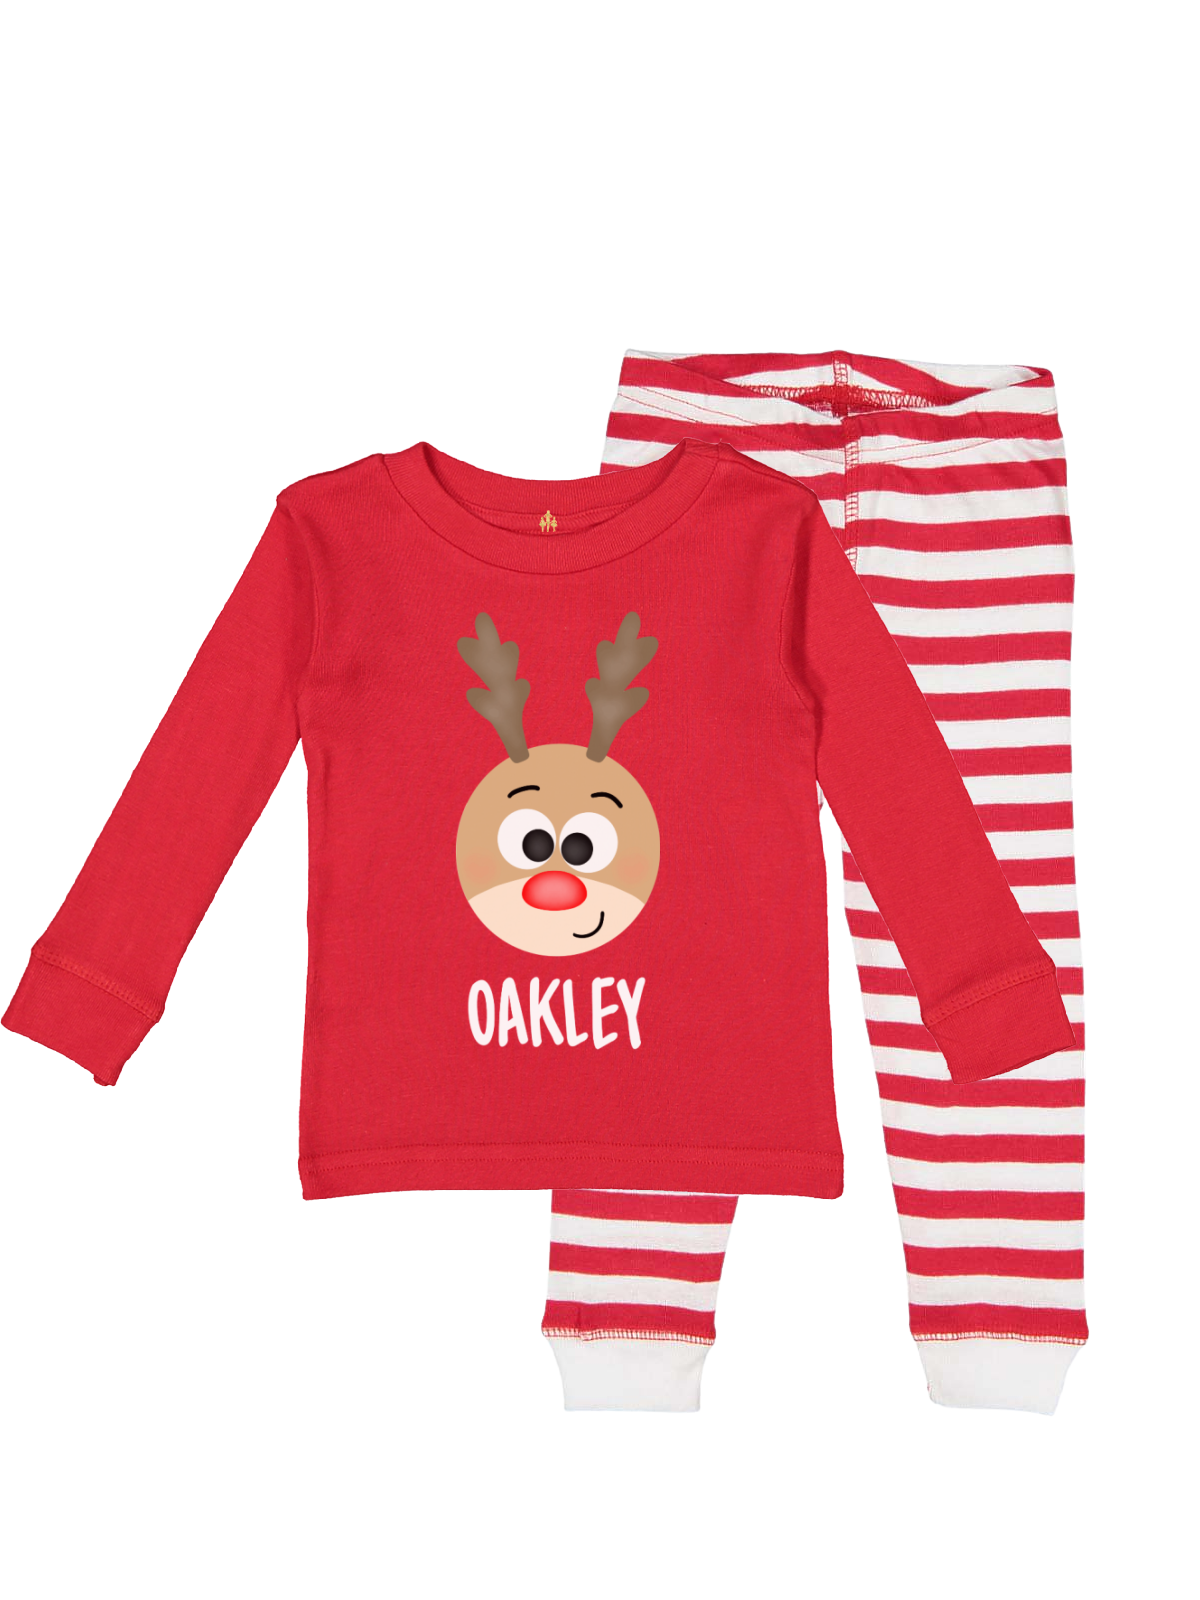 Green and Red Girls Christmas Pajamas Personalized